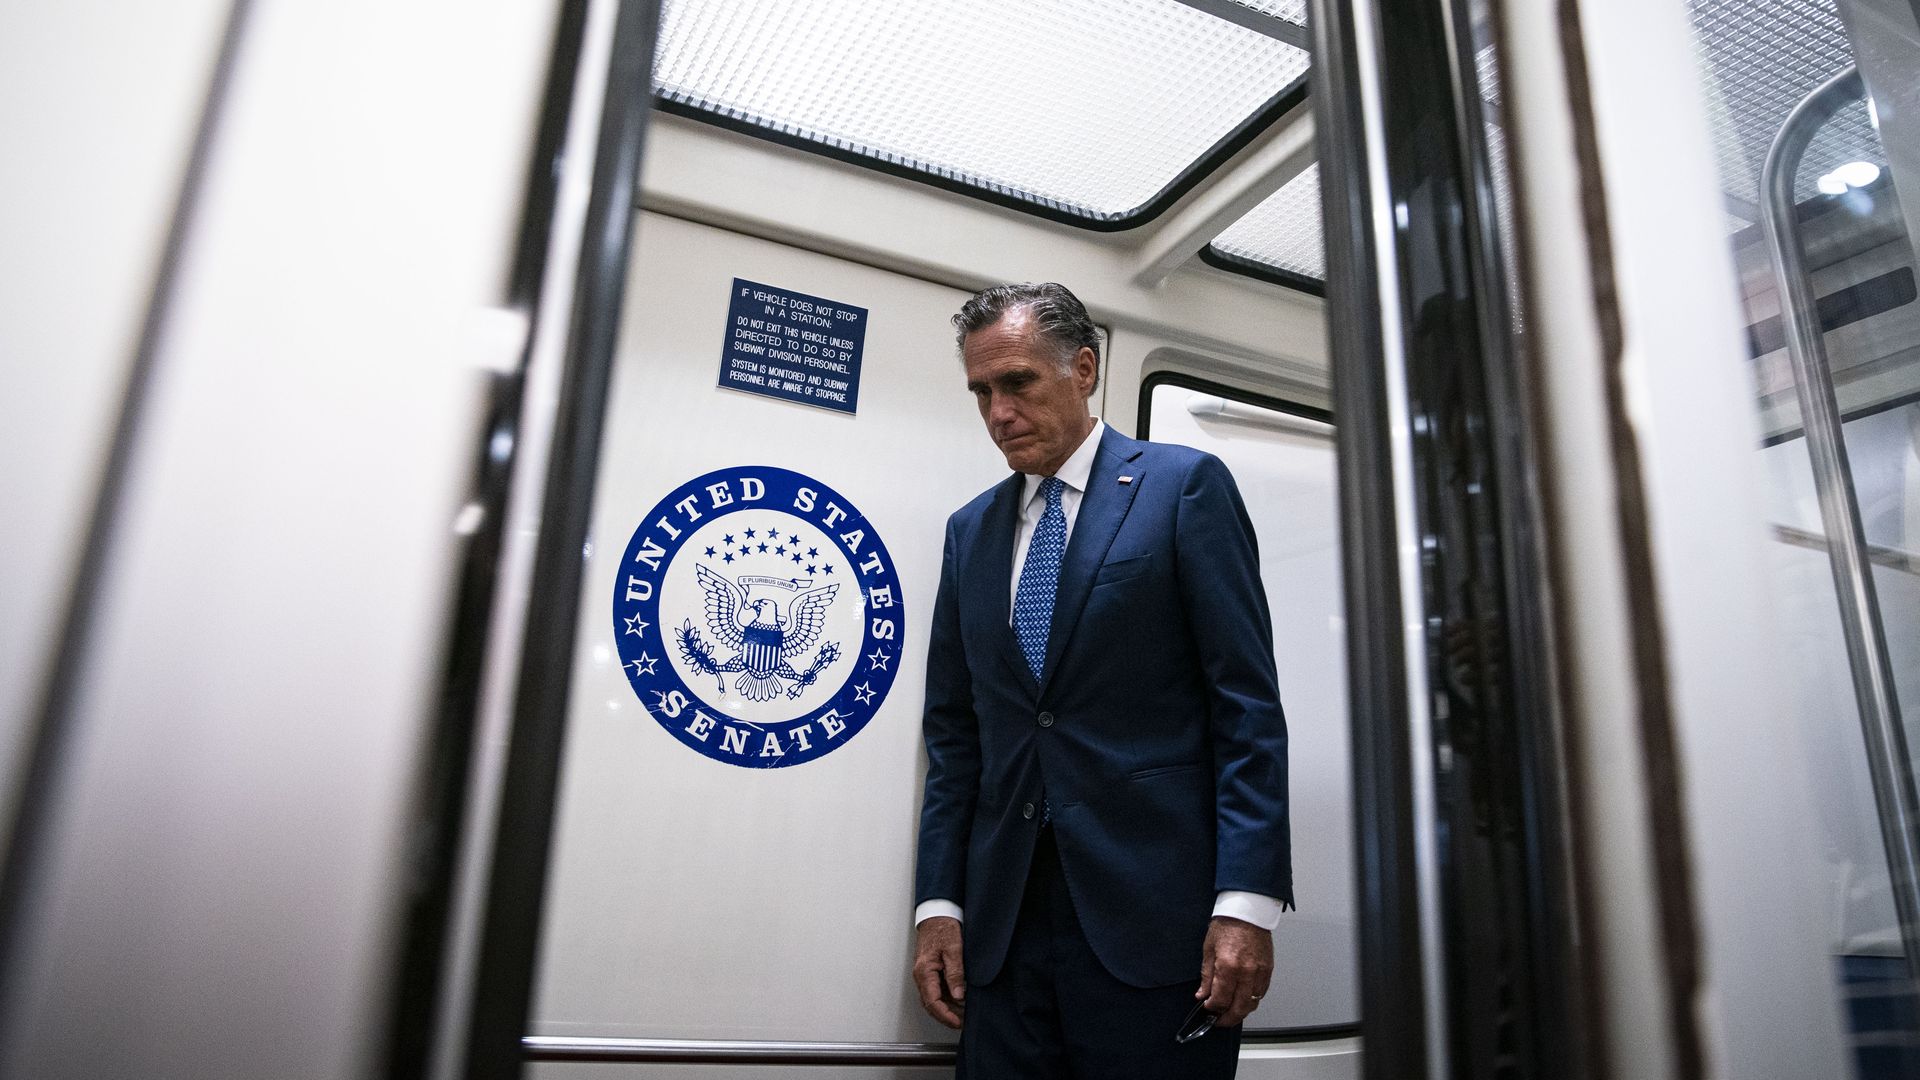 Sen. Mitt Romney is seen standing in a Senate subway car during a break in bipartisan infrastructure deal on Tuesday.